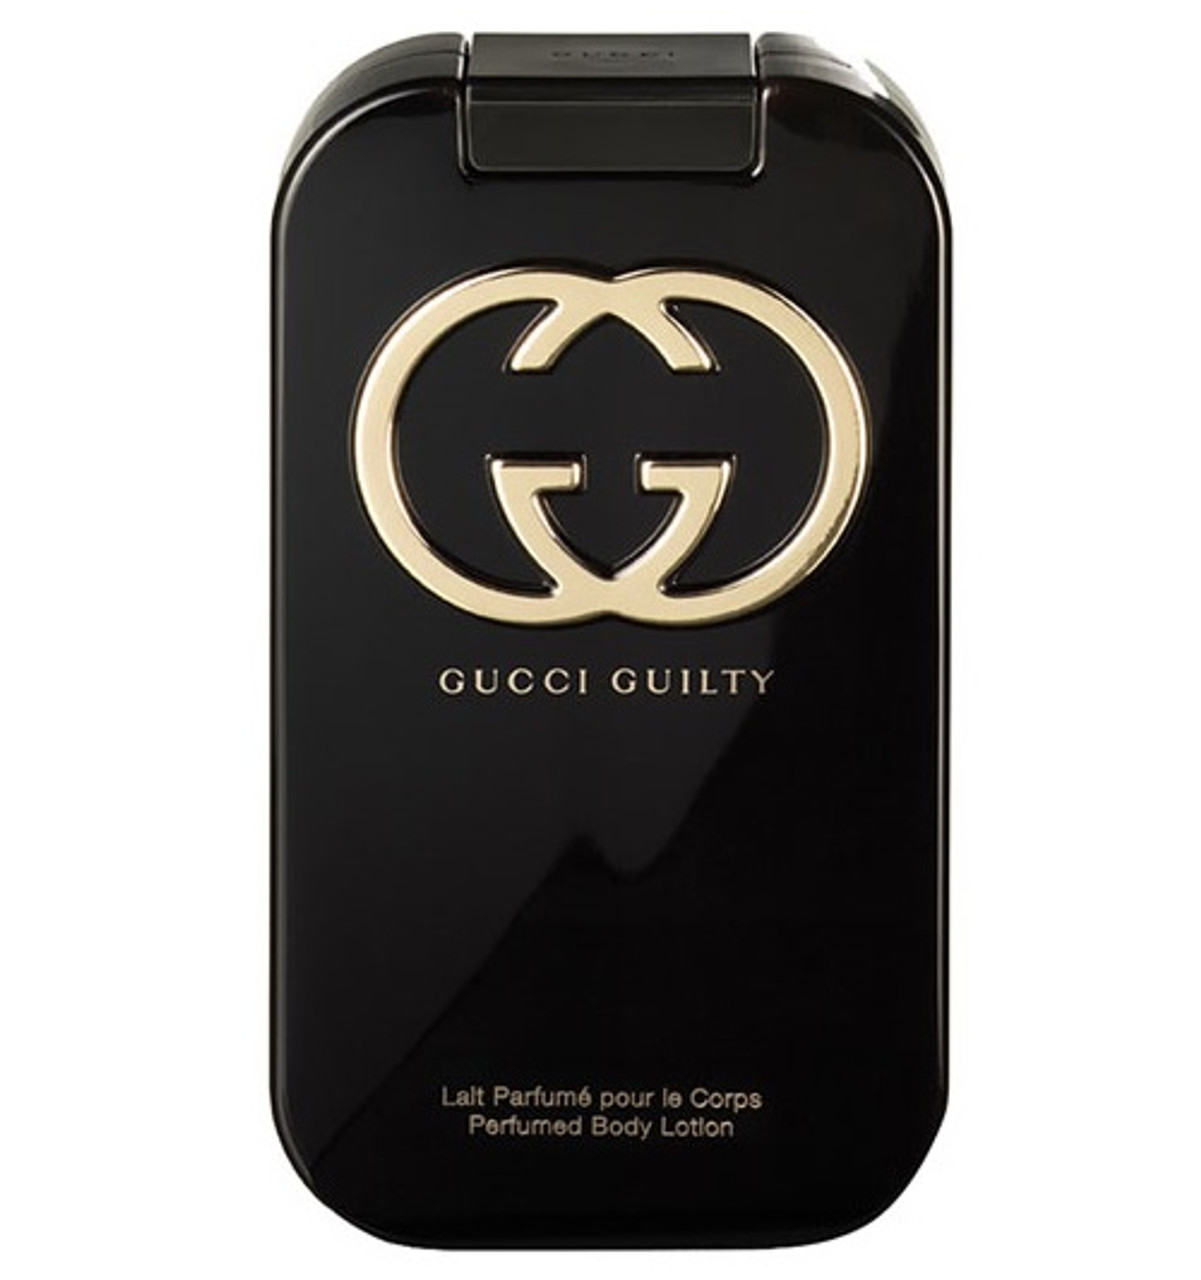 Gucci Guilty by Gucci 3.3 oz Body Lotion for women ForeverLux